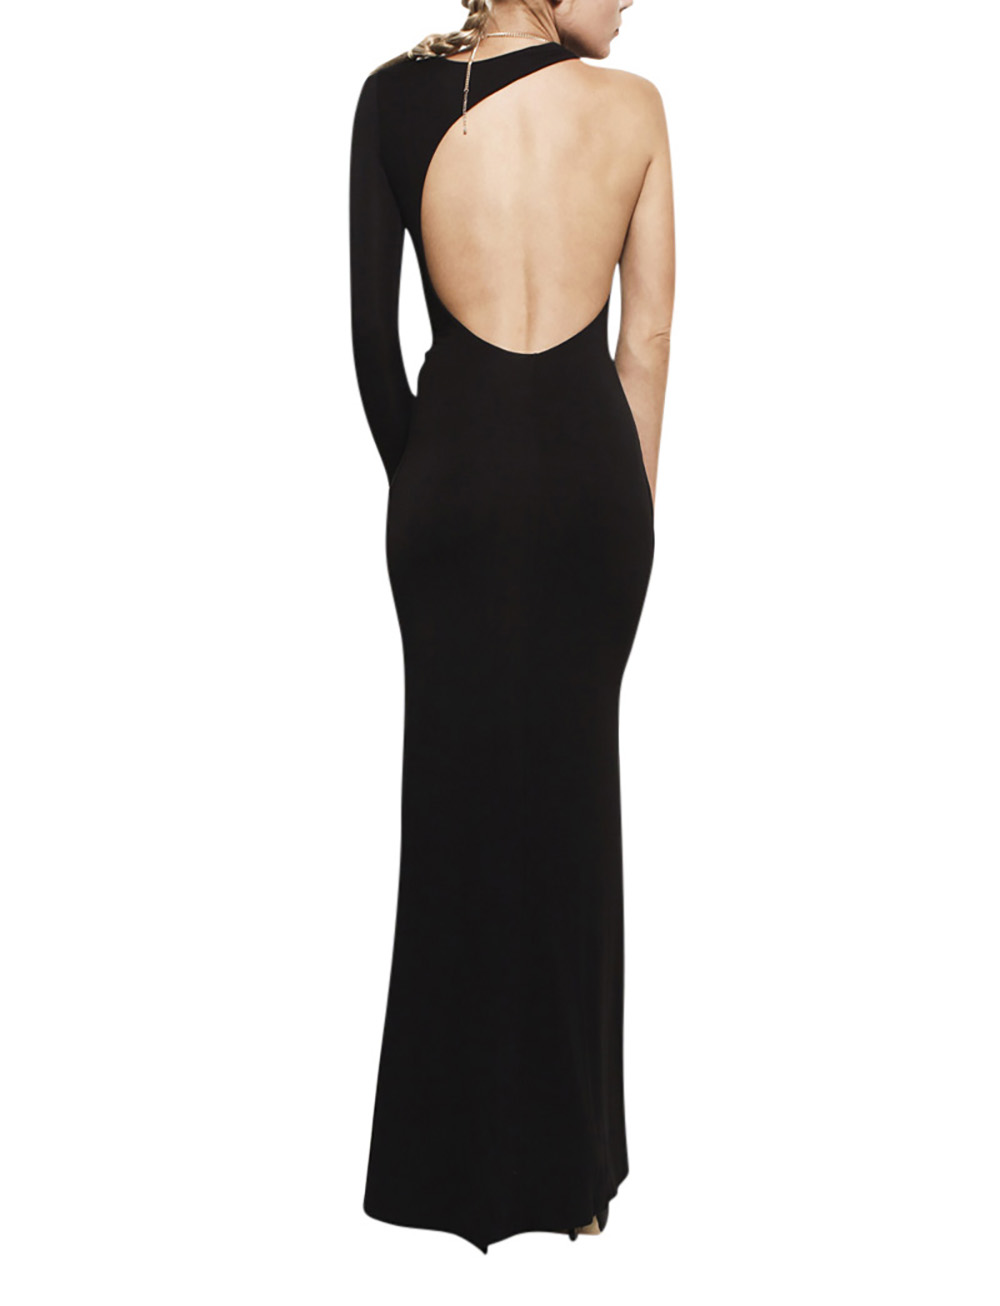 backless cocktail dress